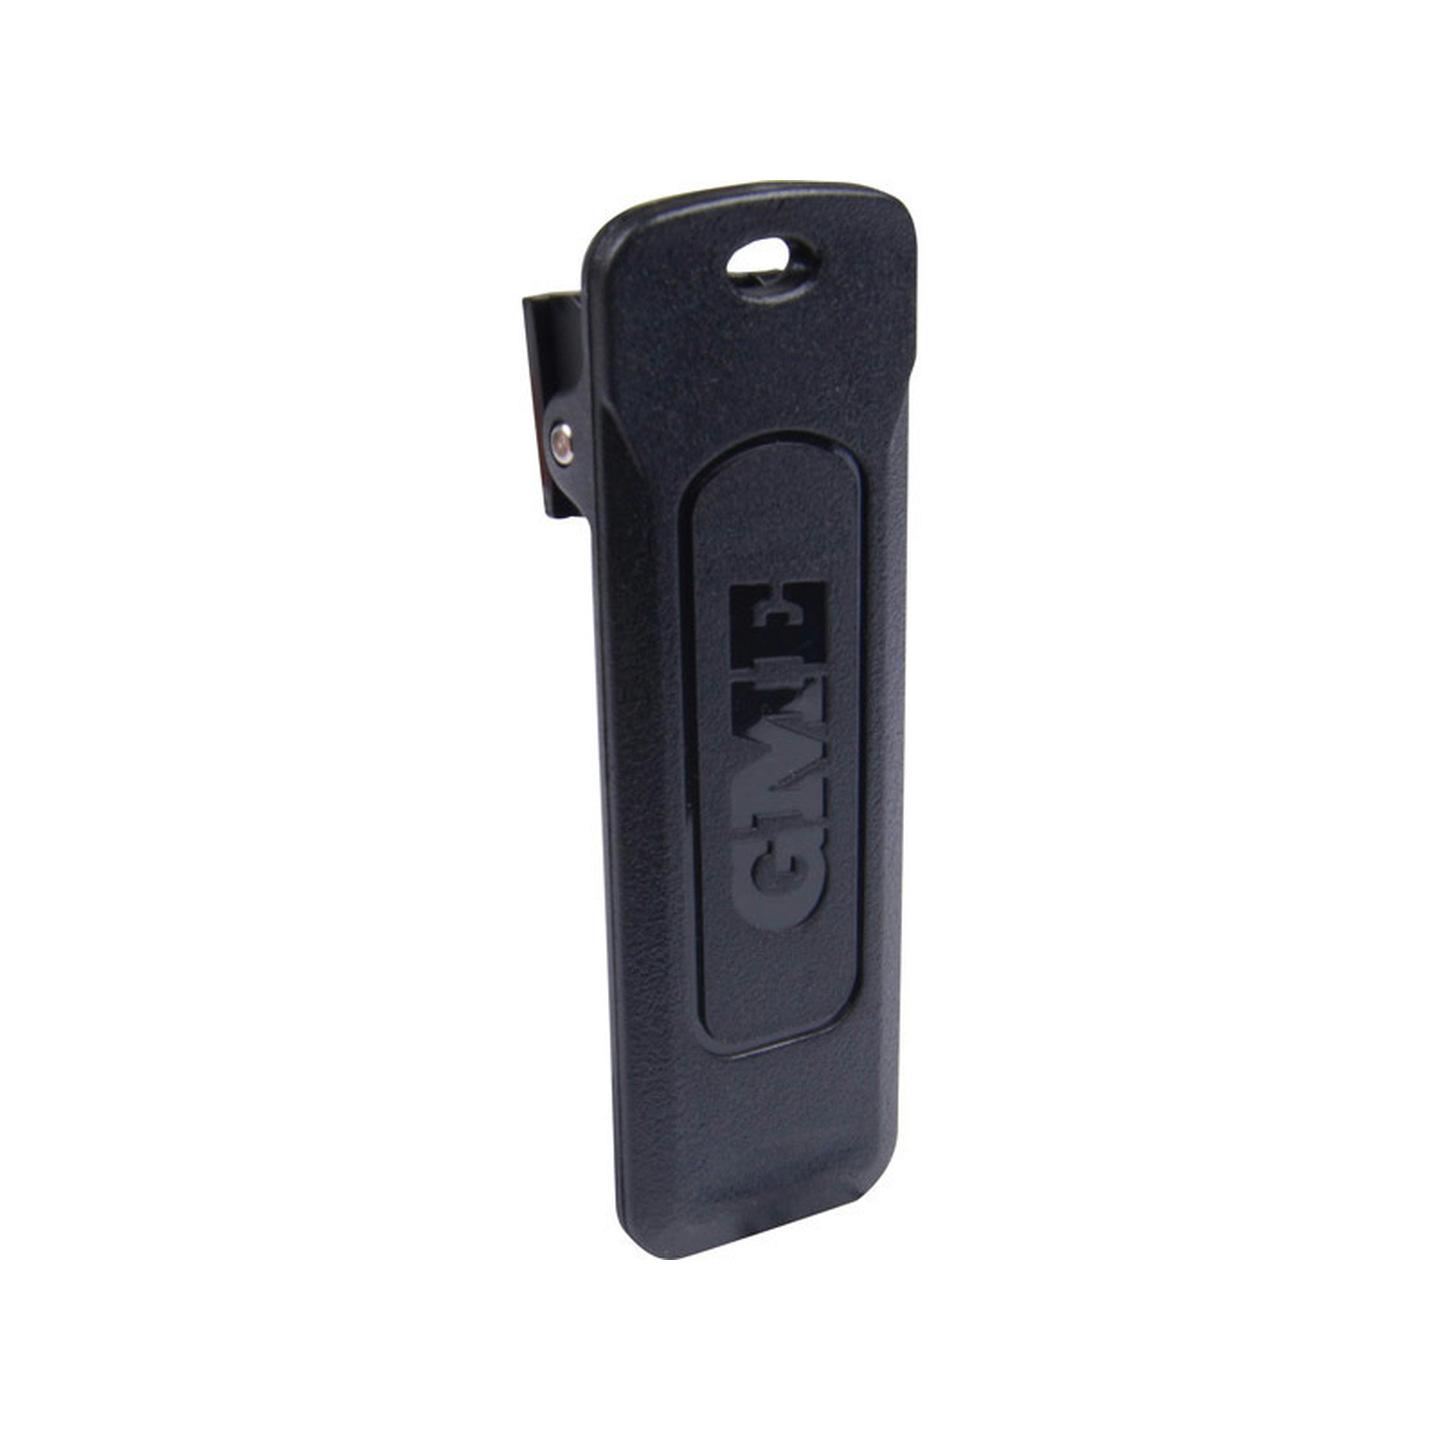 Replacement Belt Clip MB045 to Suit GME TX6160 Transceivers